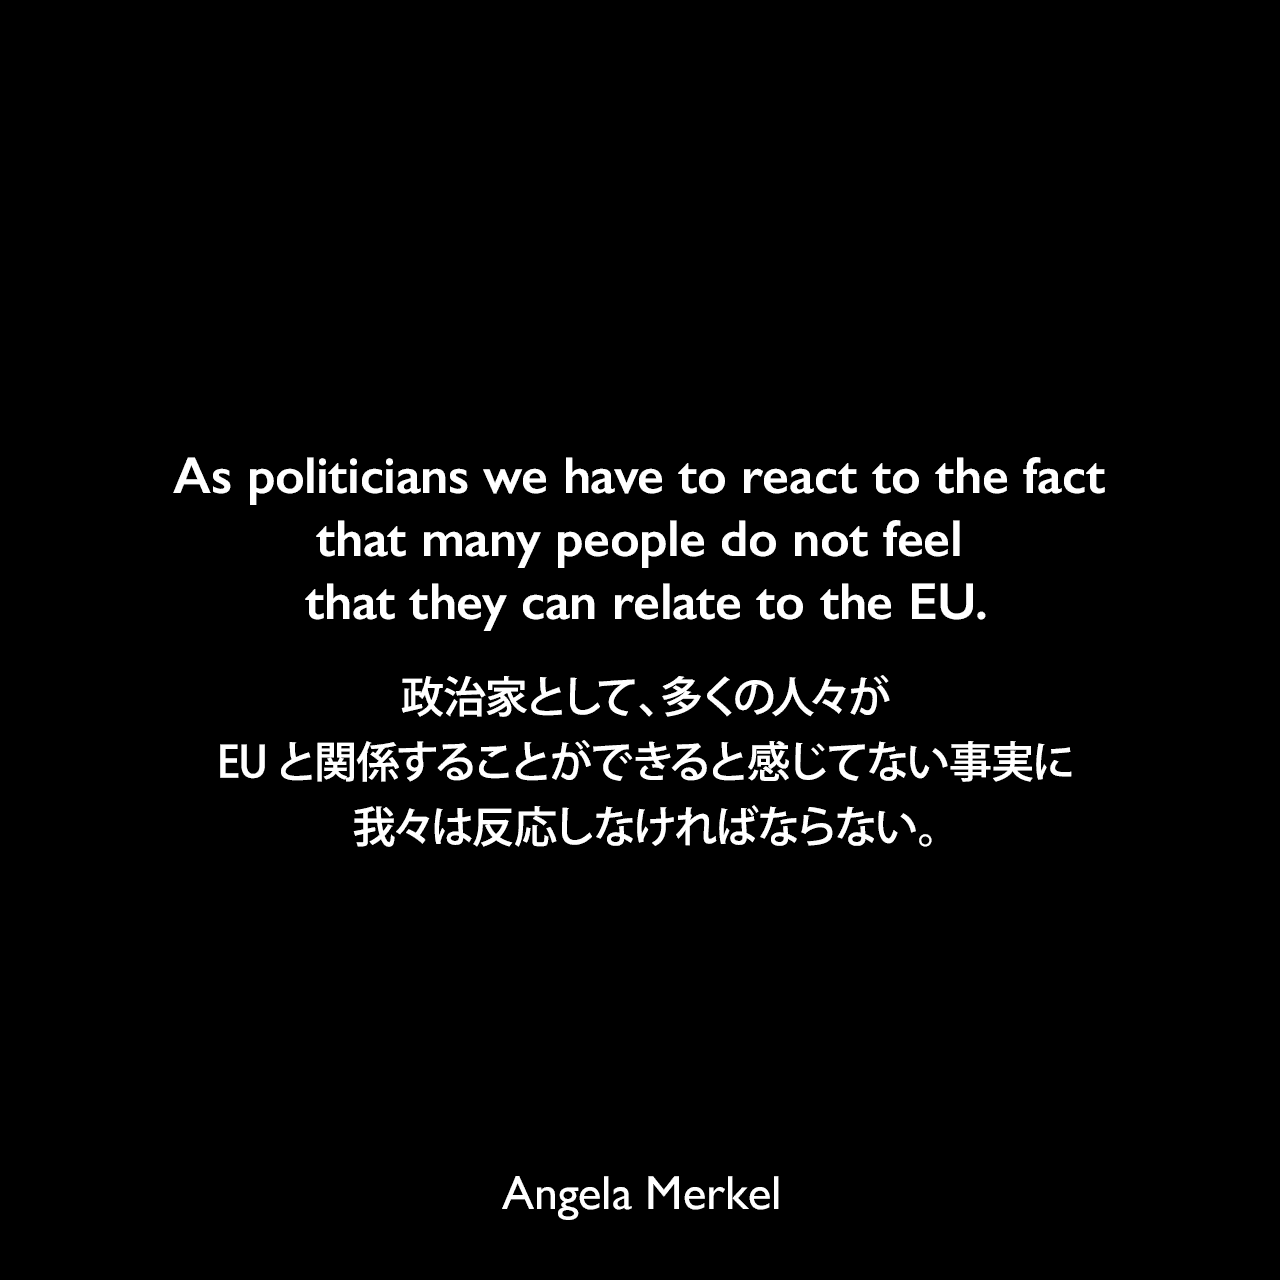 As politicians we have to react to the fact that many people do not feel that they can relate to the EU.政治家として、多くの人々がEUと関係することができると感じてない事実に我々は反応しなければならない。Angela Merkel